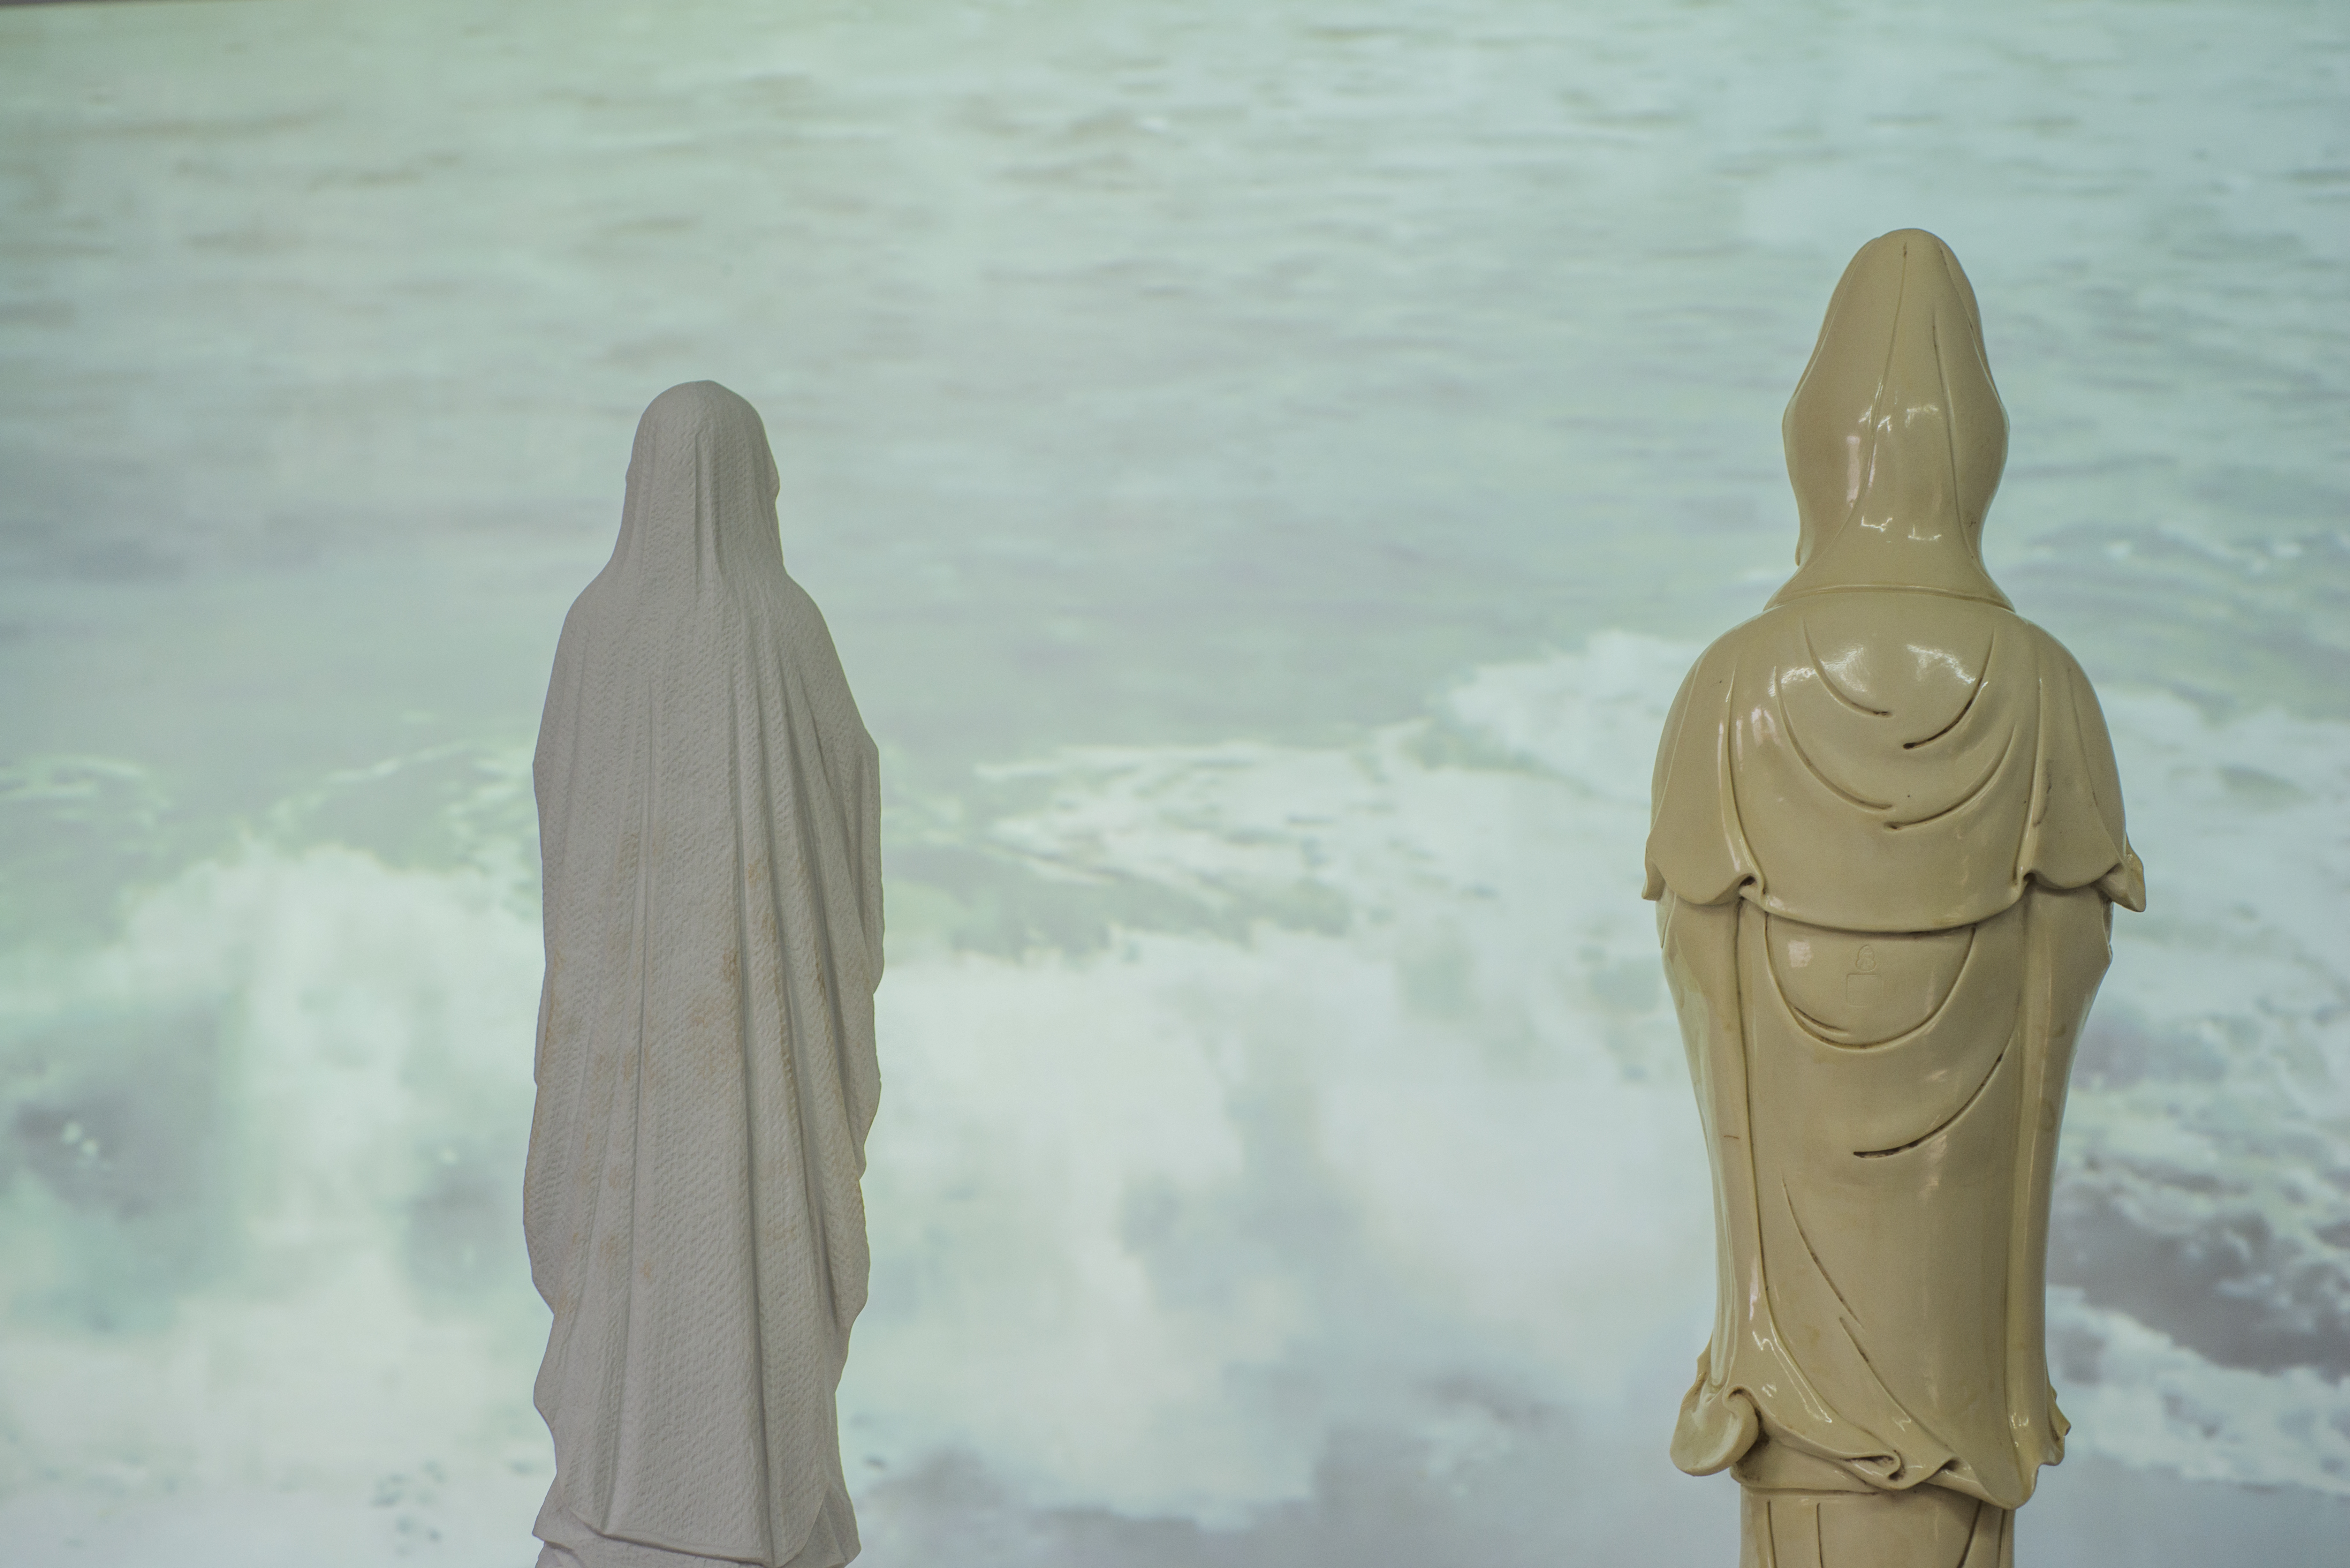 HARD WAVES (Kuanyin and Virgin Mary staring at the sea), 2017/marble, Dehua porcelain, video 1:25.33 min/ installation's view